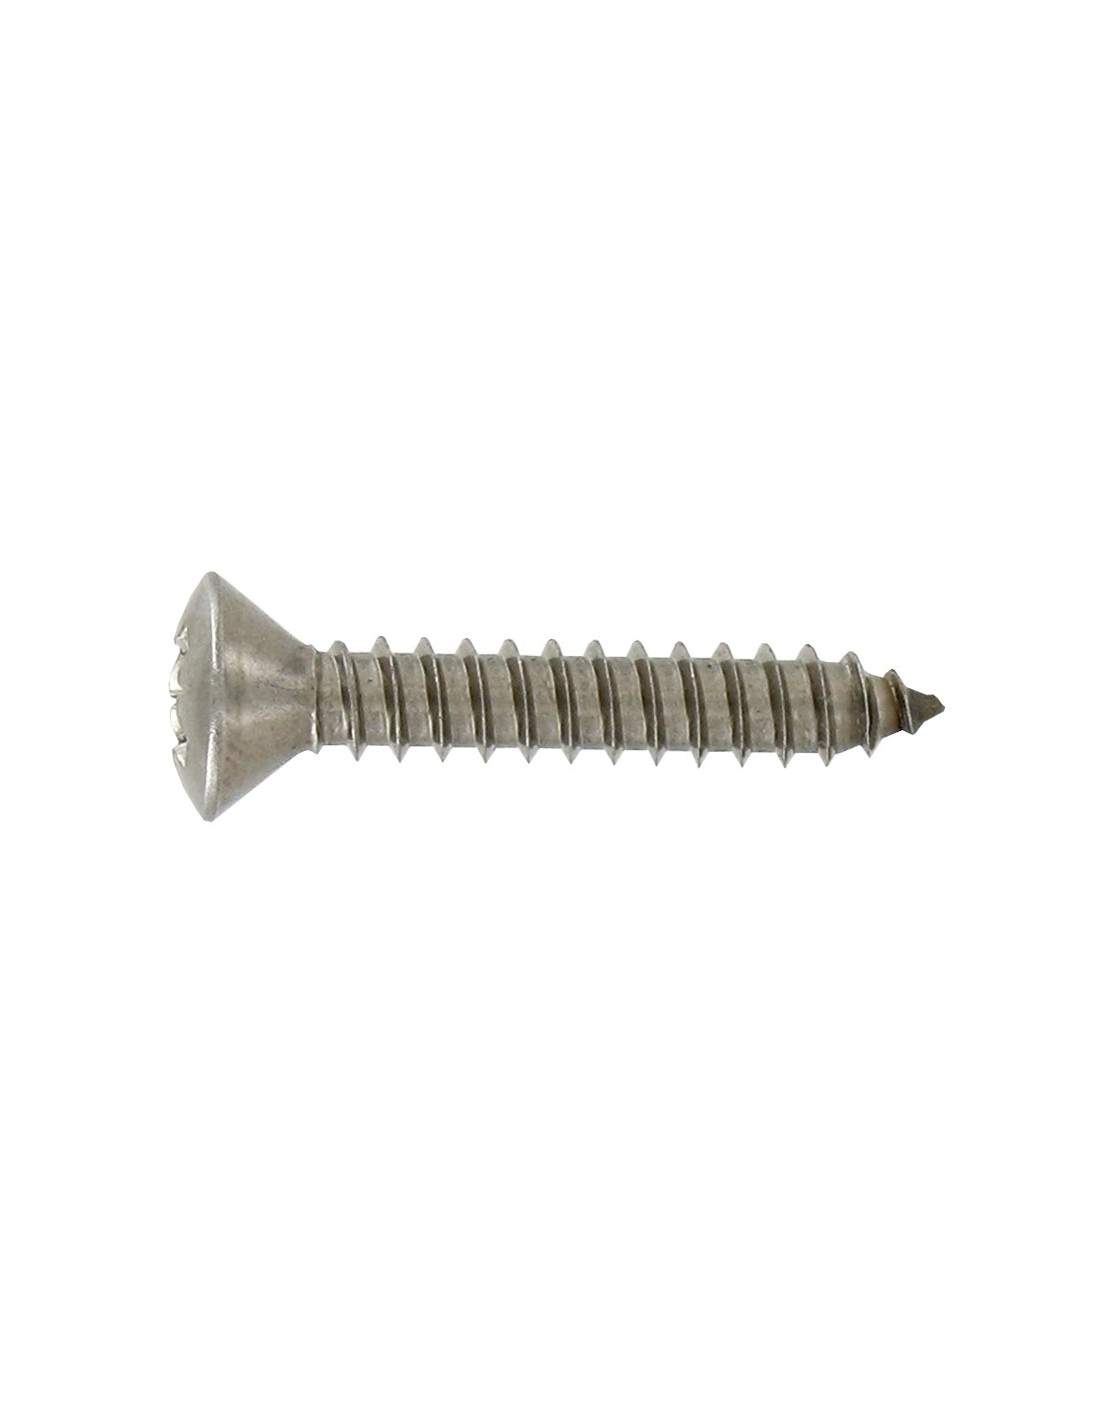 Countersunk-head tapping screw, stainless steel A4 3.5x16, 27 pcs.